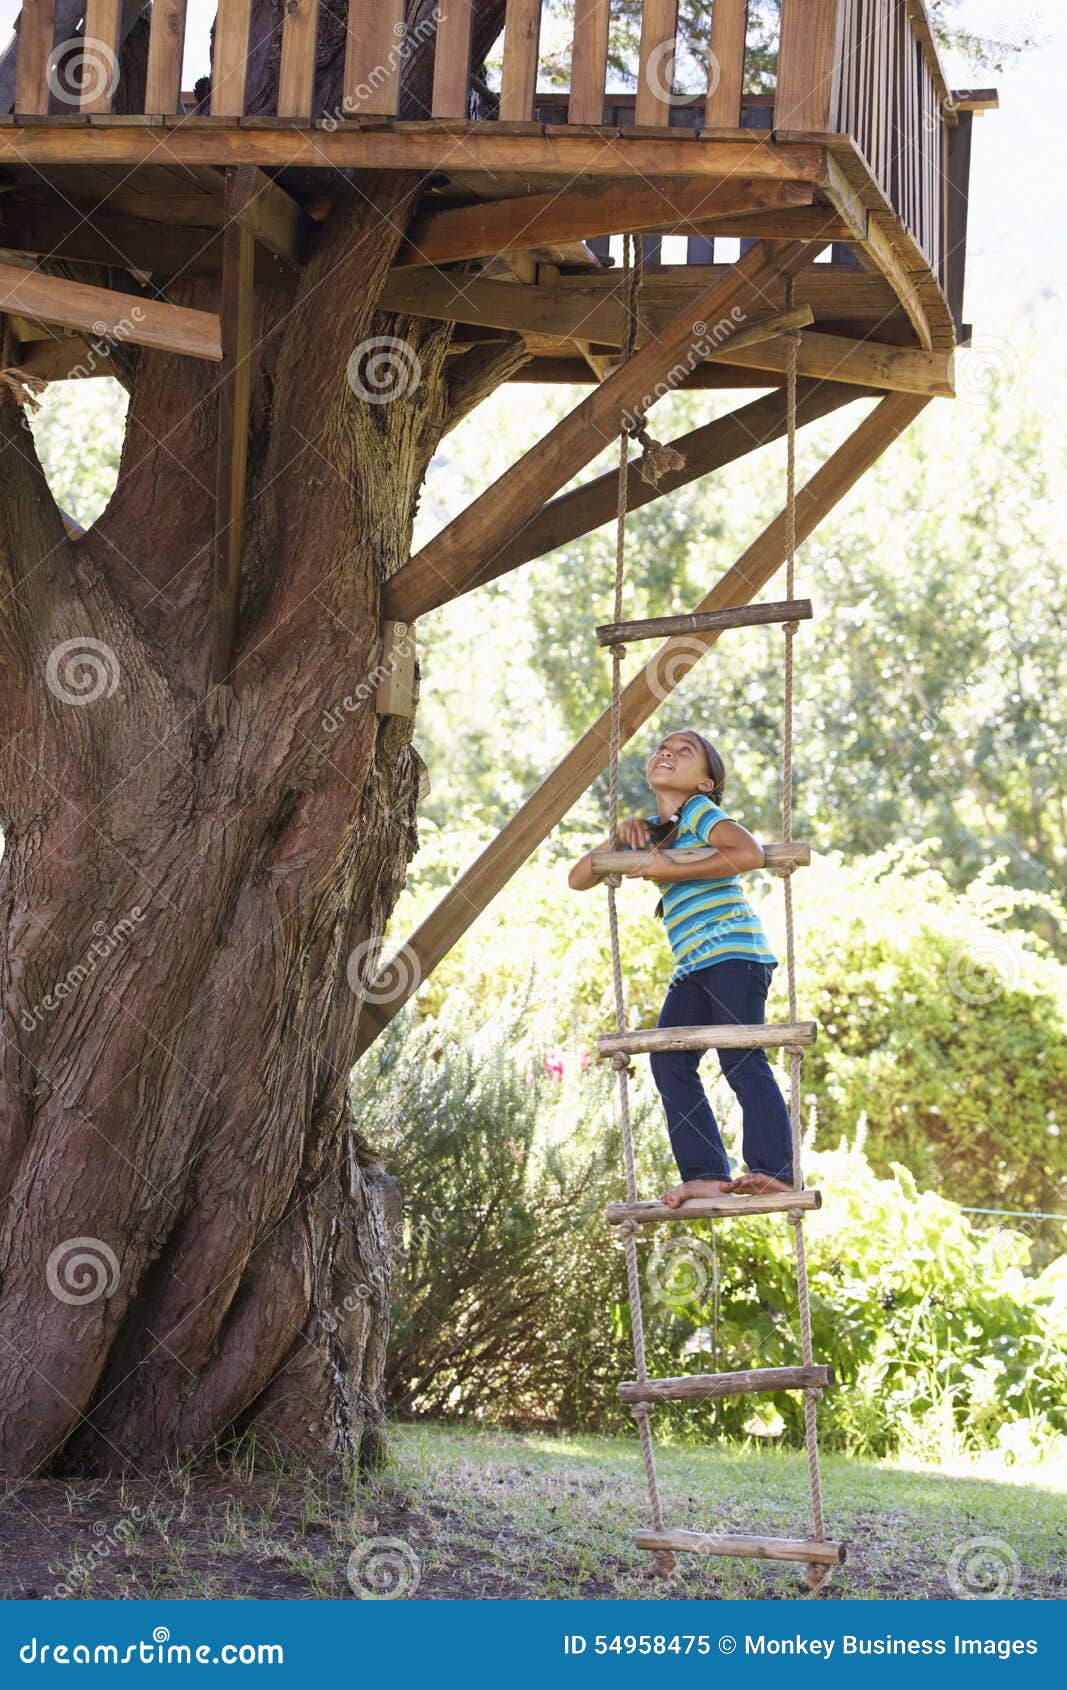 Young Girl Climbing Rope Ladder To Treehouse Stock Image - Image